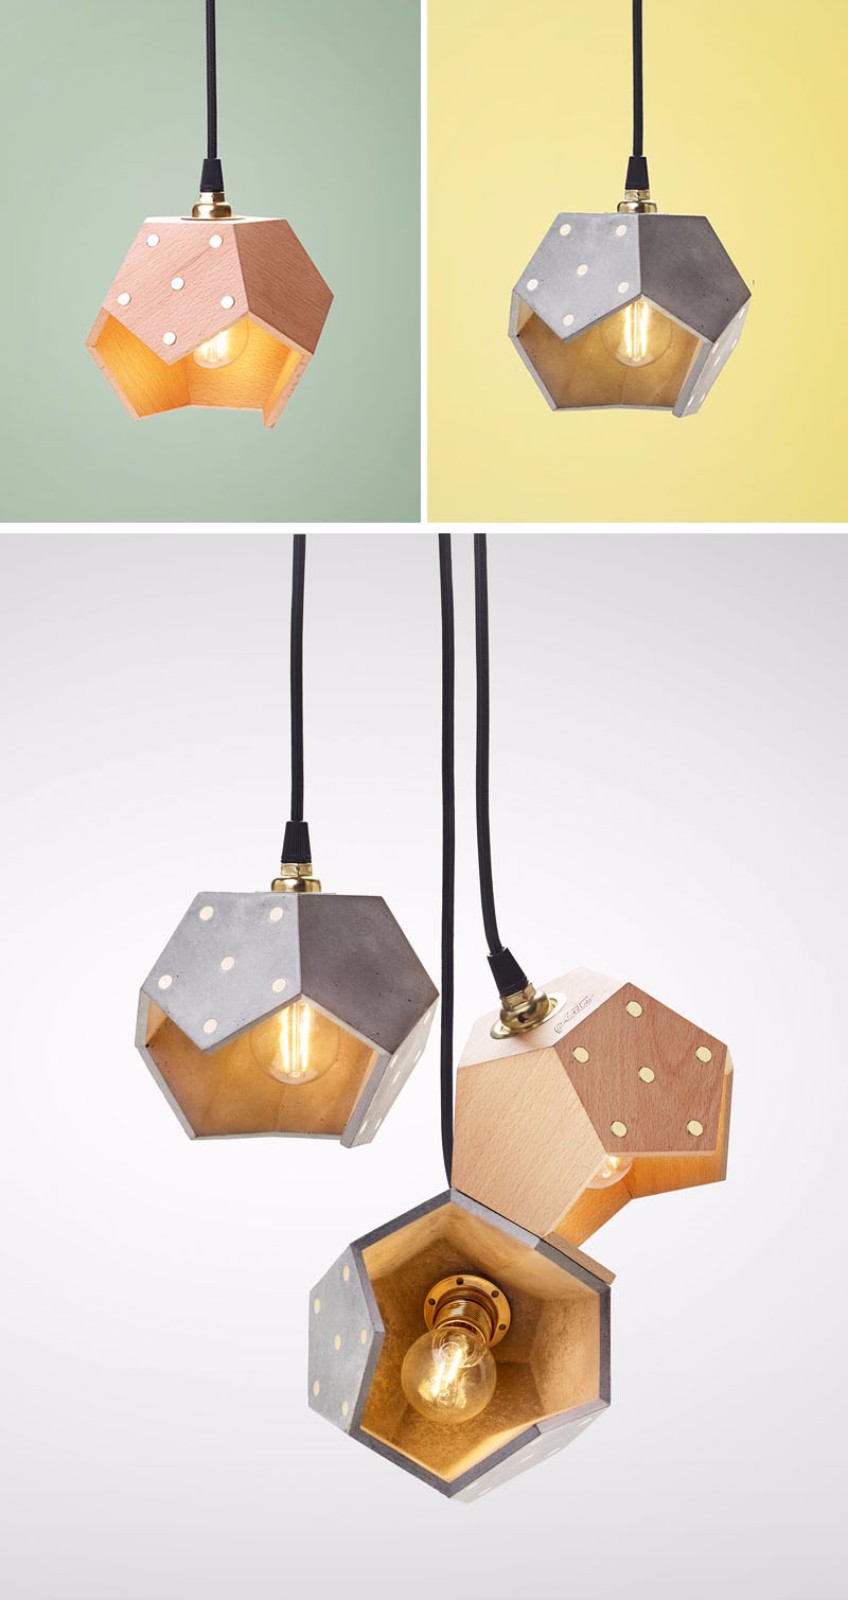 Lighting Design Meet These Wood Magnetic Lamps by Plato Design